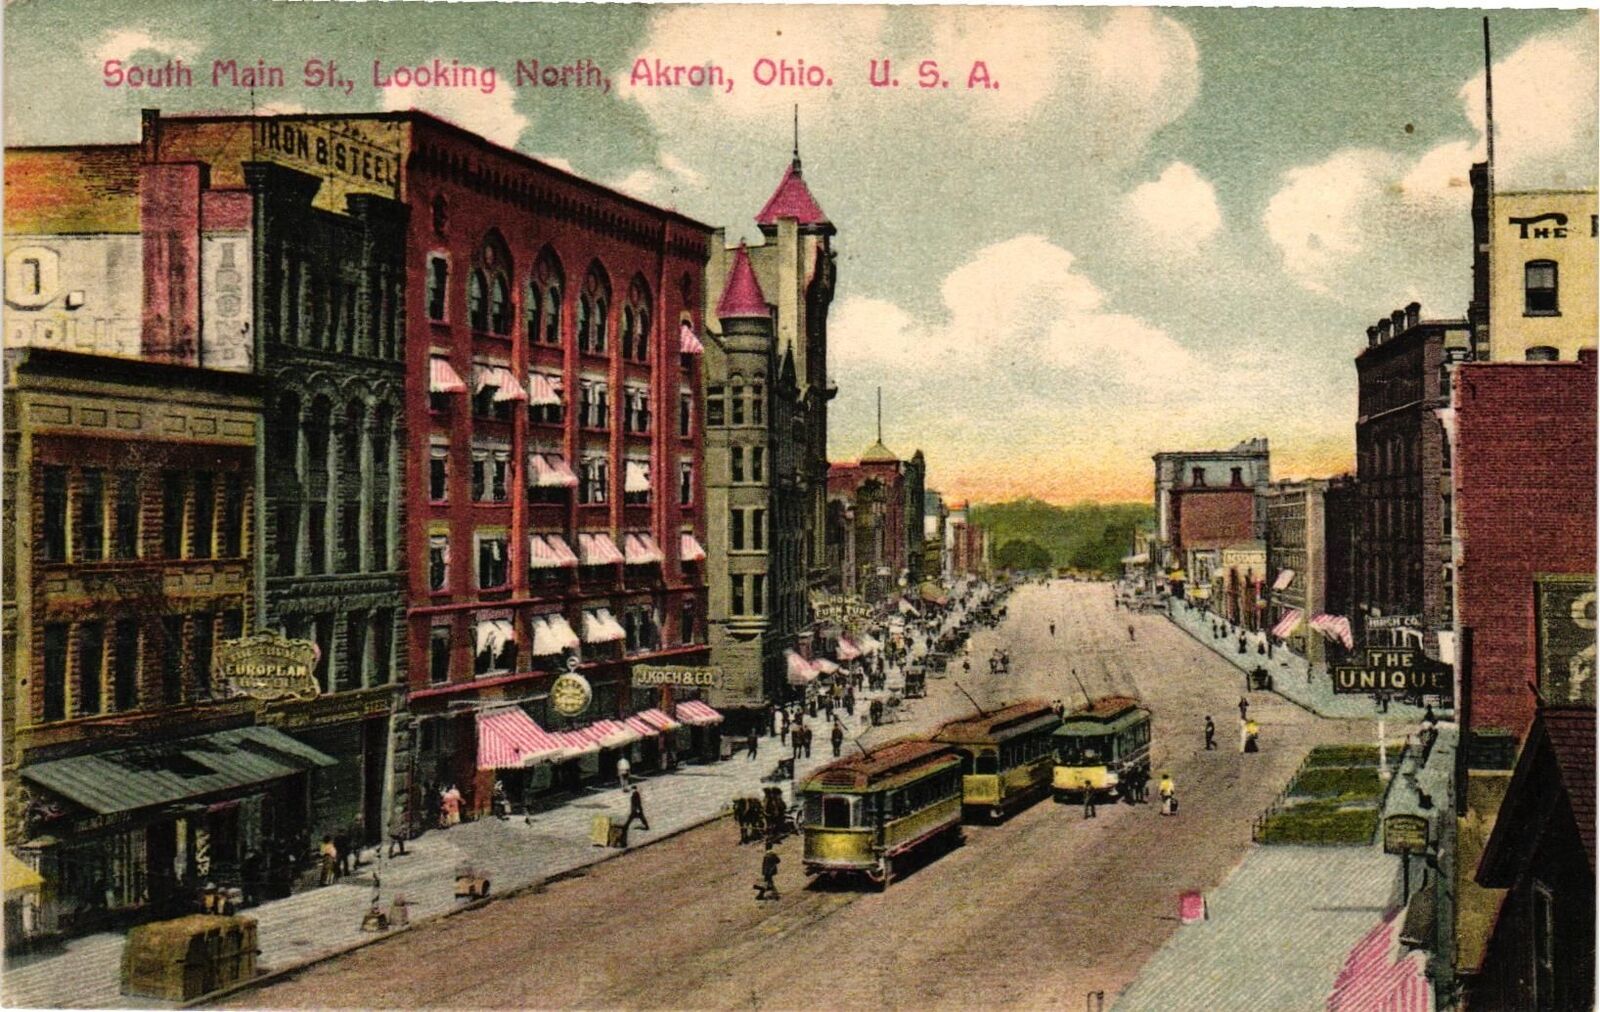 Vintage Postcard- SOUTH MAIN ST., AKRON, OH. Early 1900s